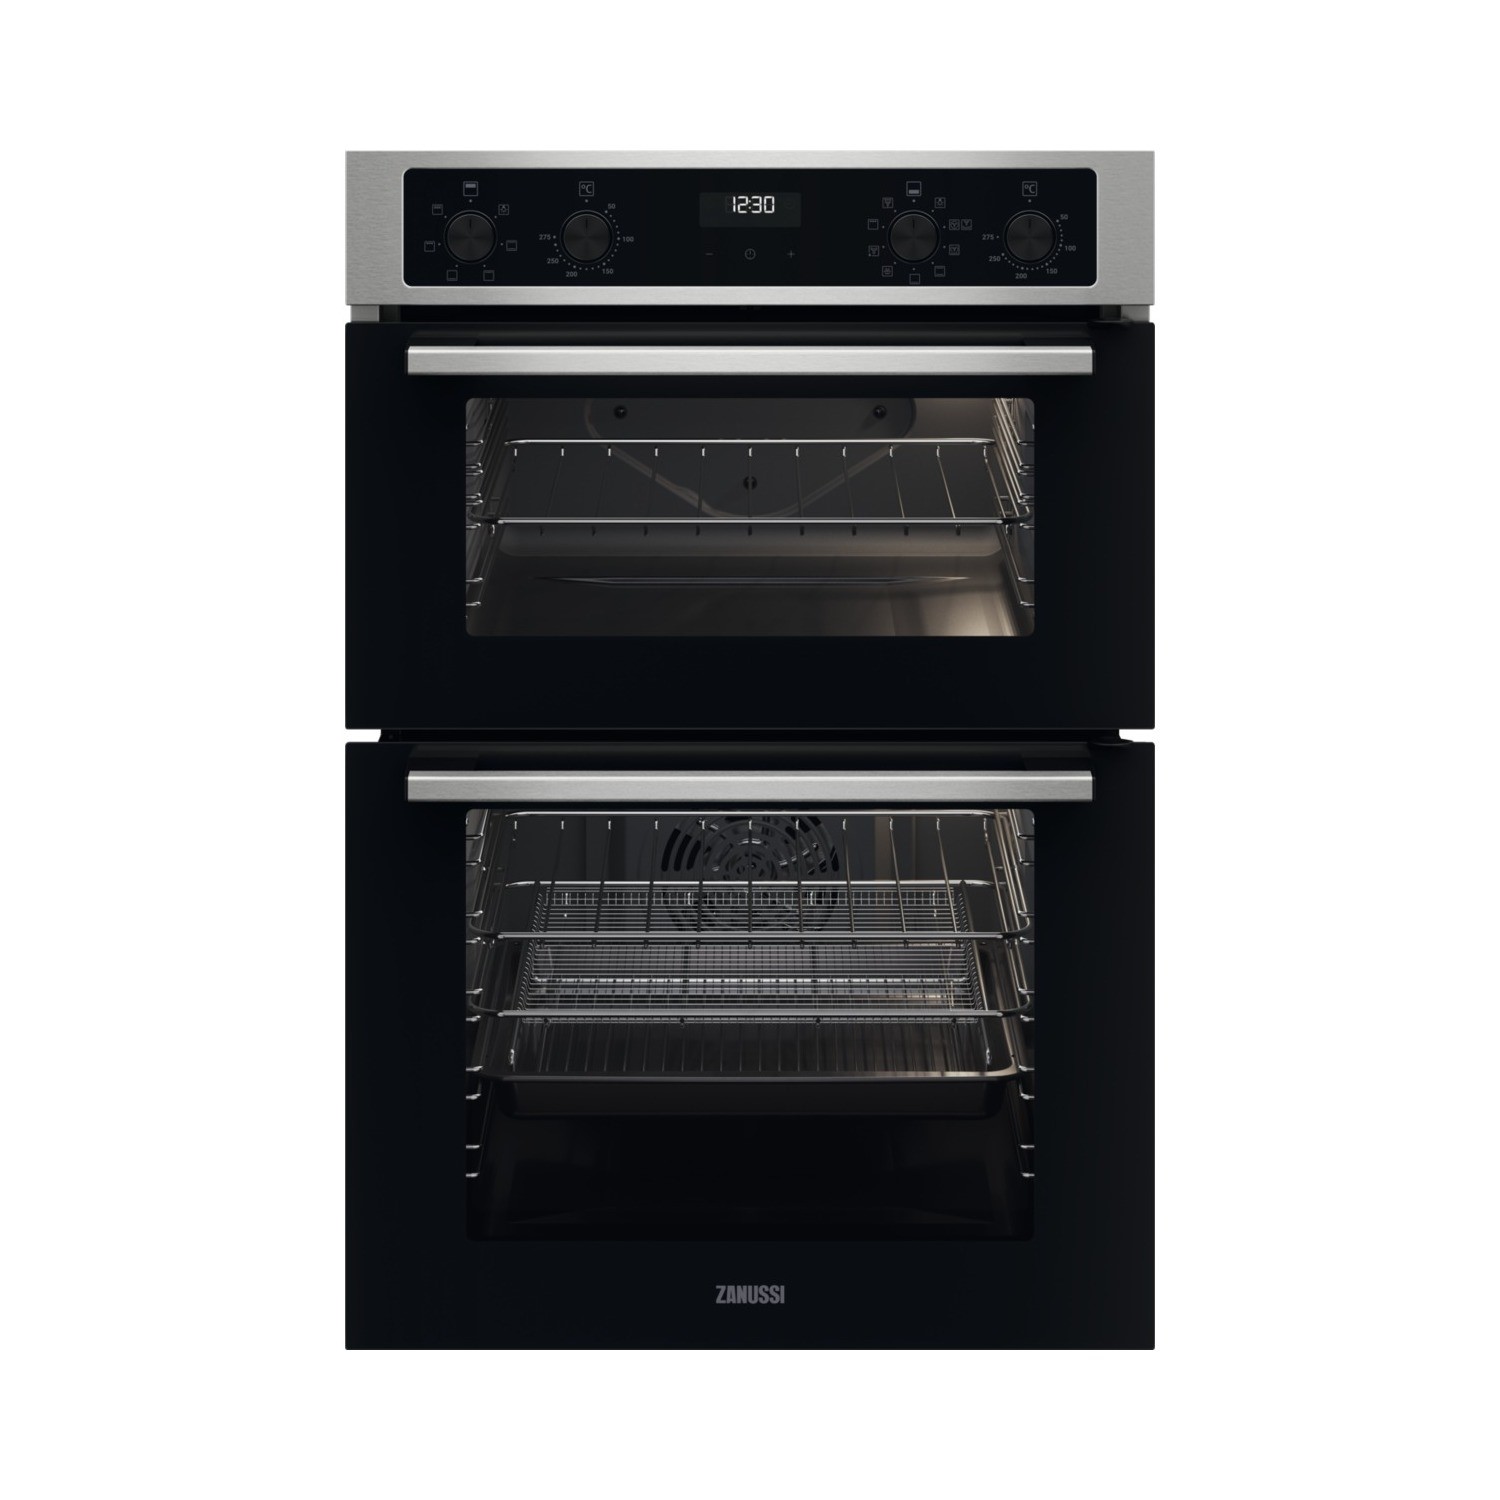 Refurbished Zanussi Series 20 ZKCNA4X1 Double Built In Electric Oven with Catalytic Cleaning Stainle